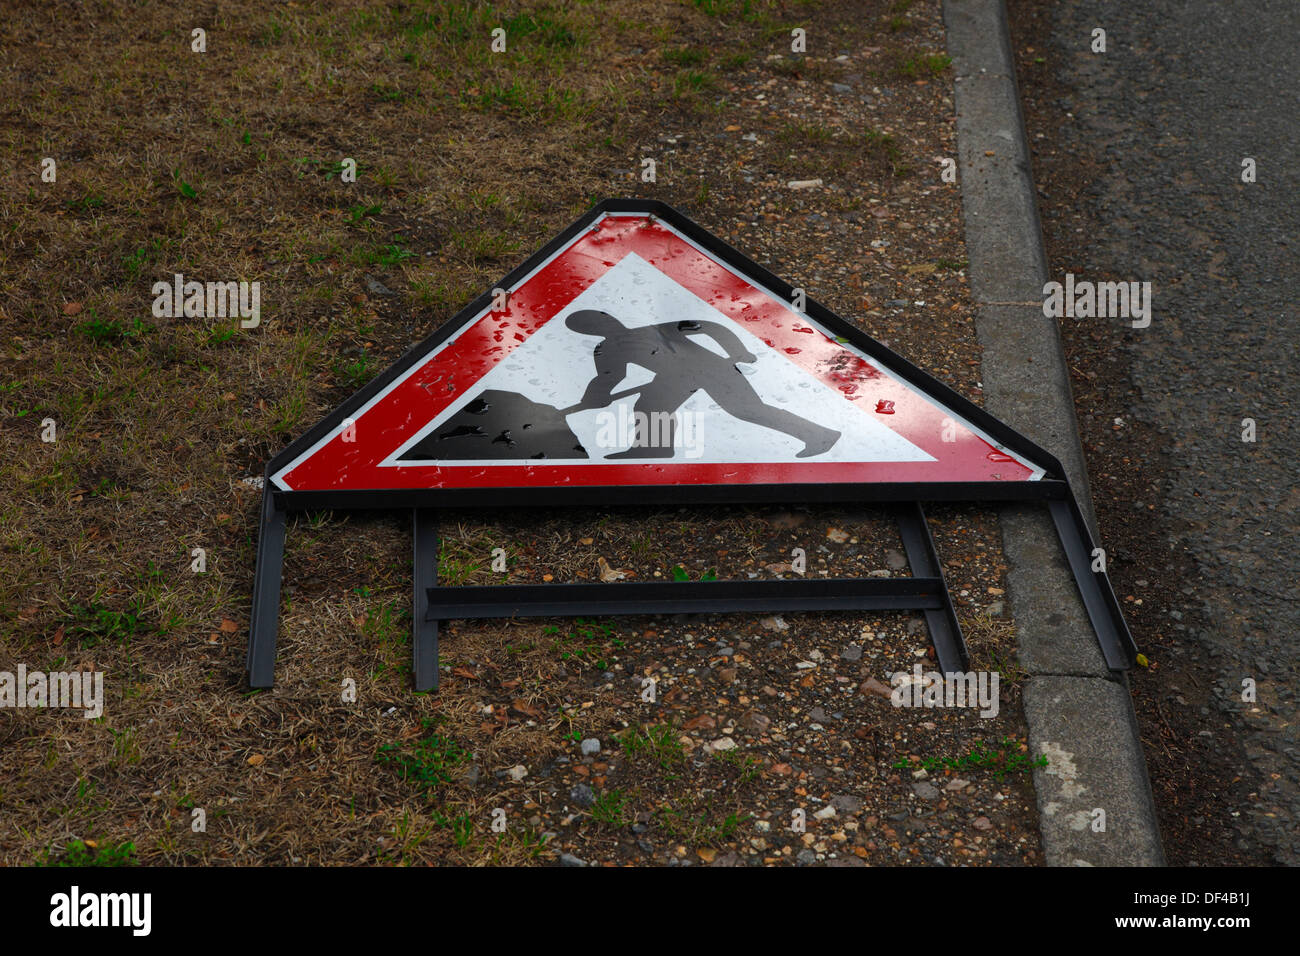 Road works sign laid down at side of road Stock Photo